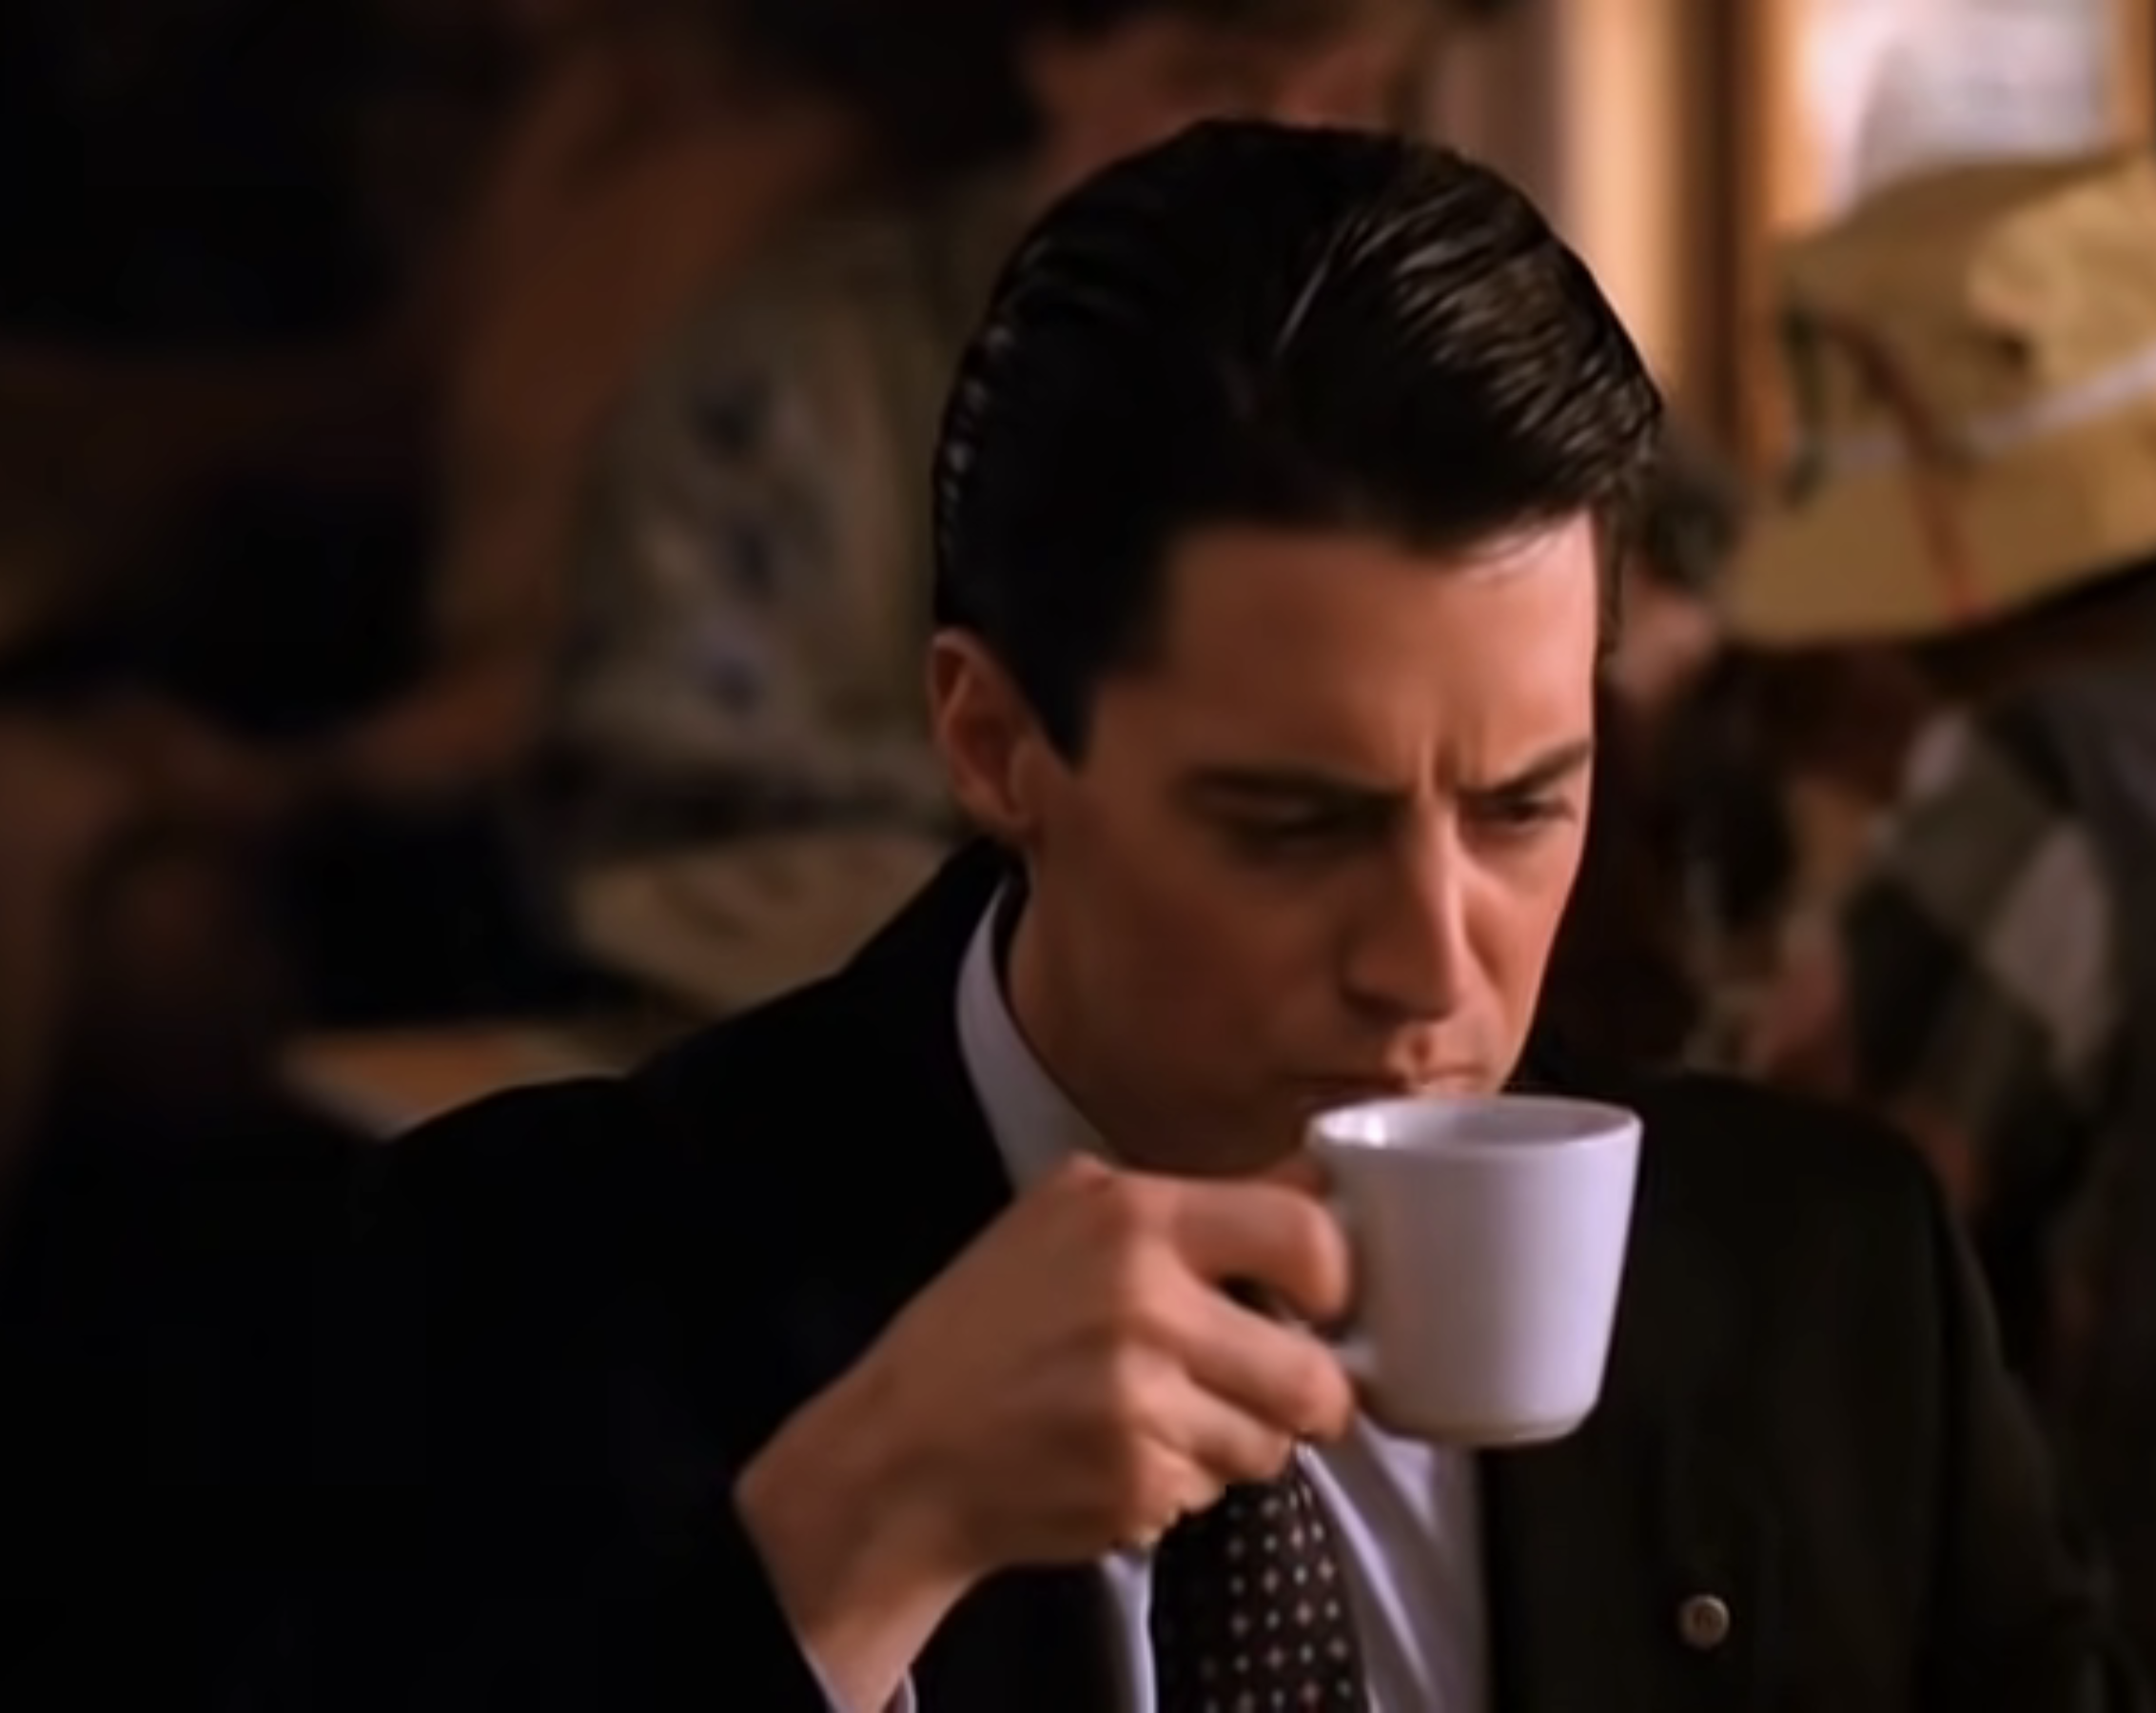 Agent Dale Cooper from Twin Peaks sipping coffee, wearing a black suit with a focused expression